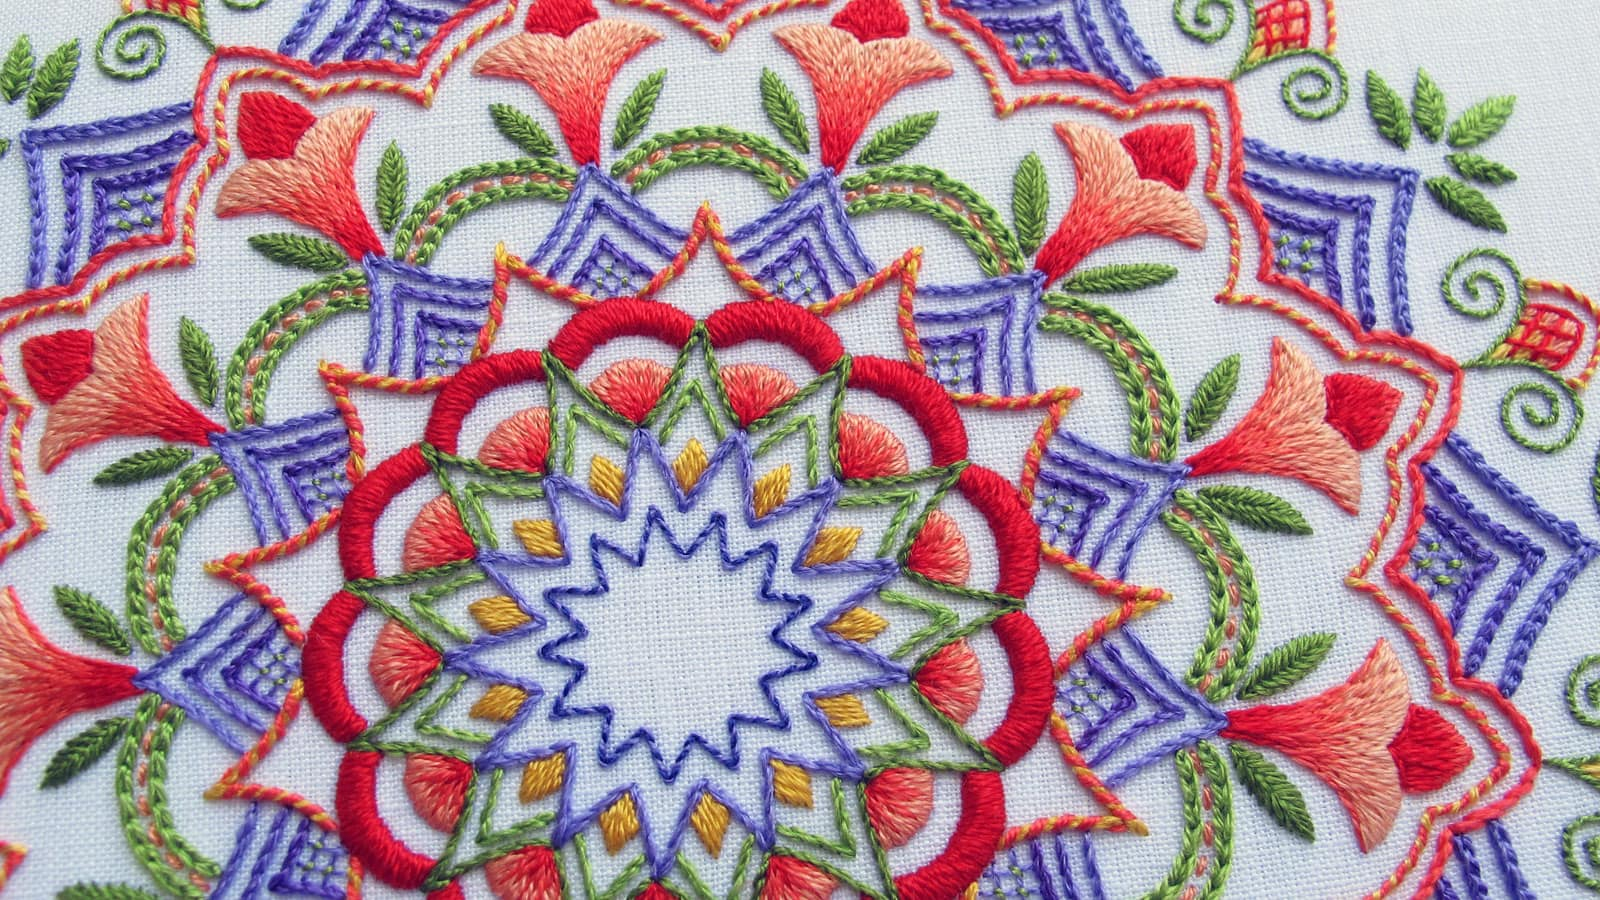 Primitive Embroidery Patterns Free Needlenthread Tips Tricks And Great Resources For Hand Embroidery